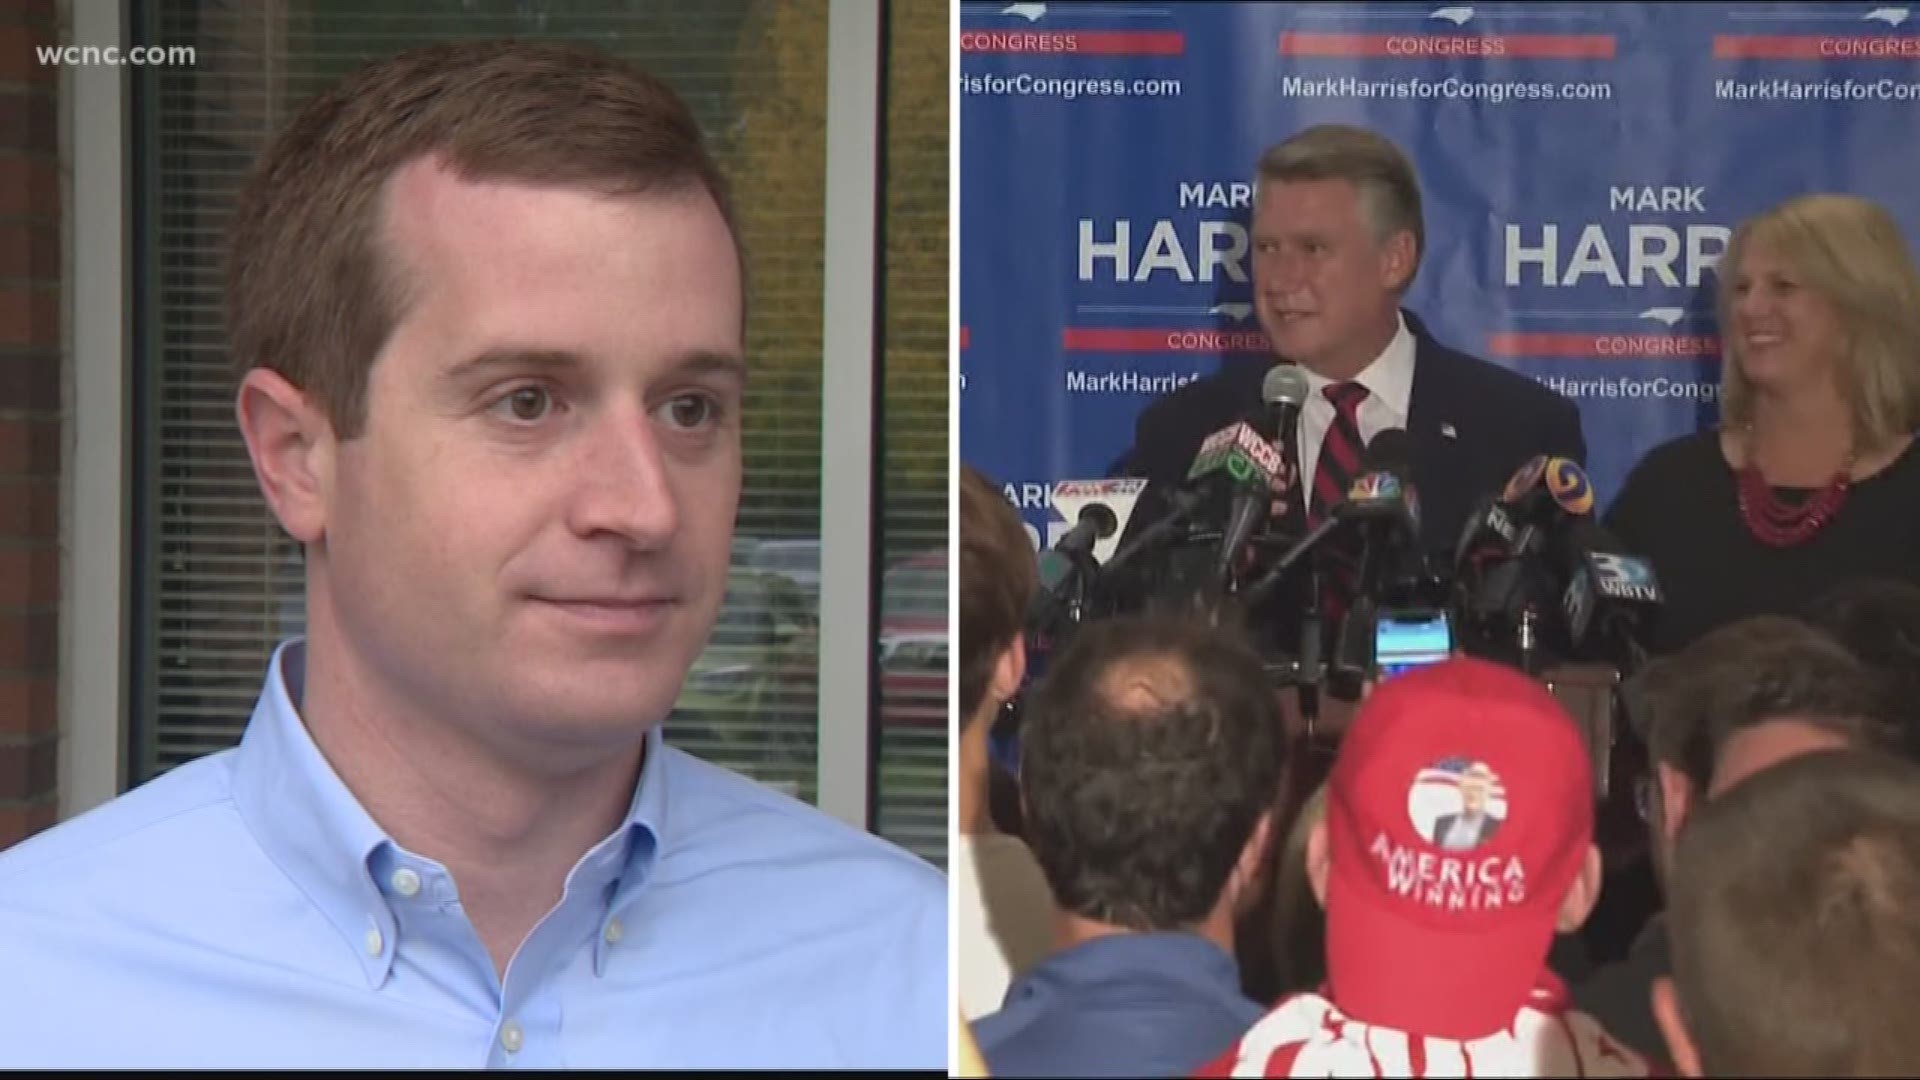 The allegations alone prompted Democrat Dan McCready, who unofficialy lost by 905 votes, to rescind his concession to Republican Mark Harris.